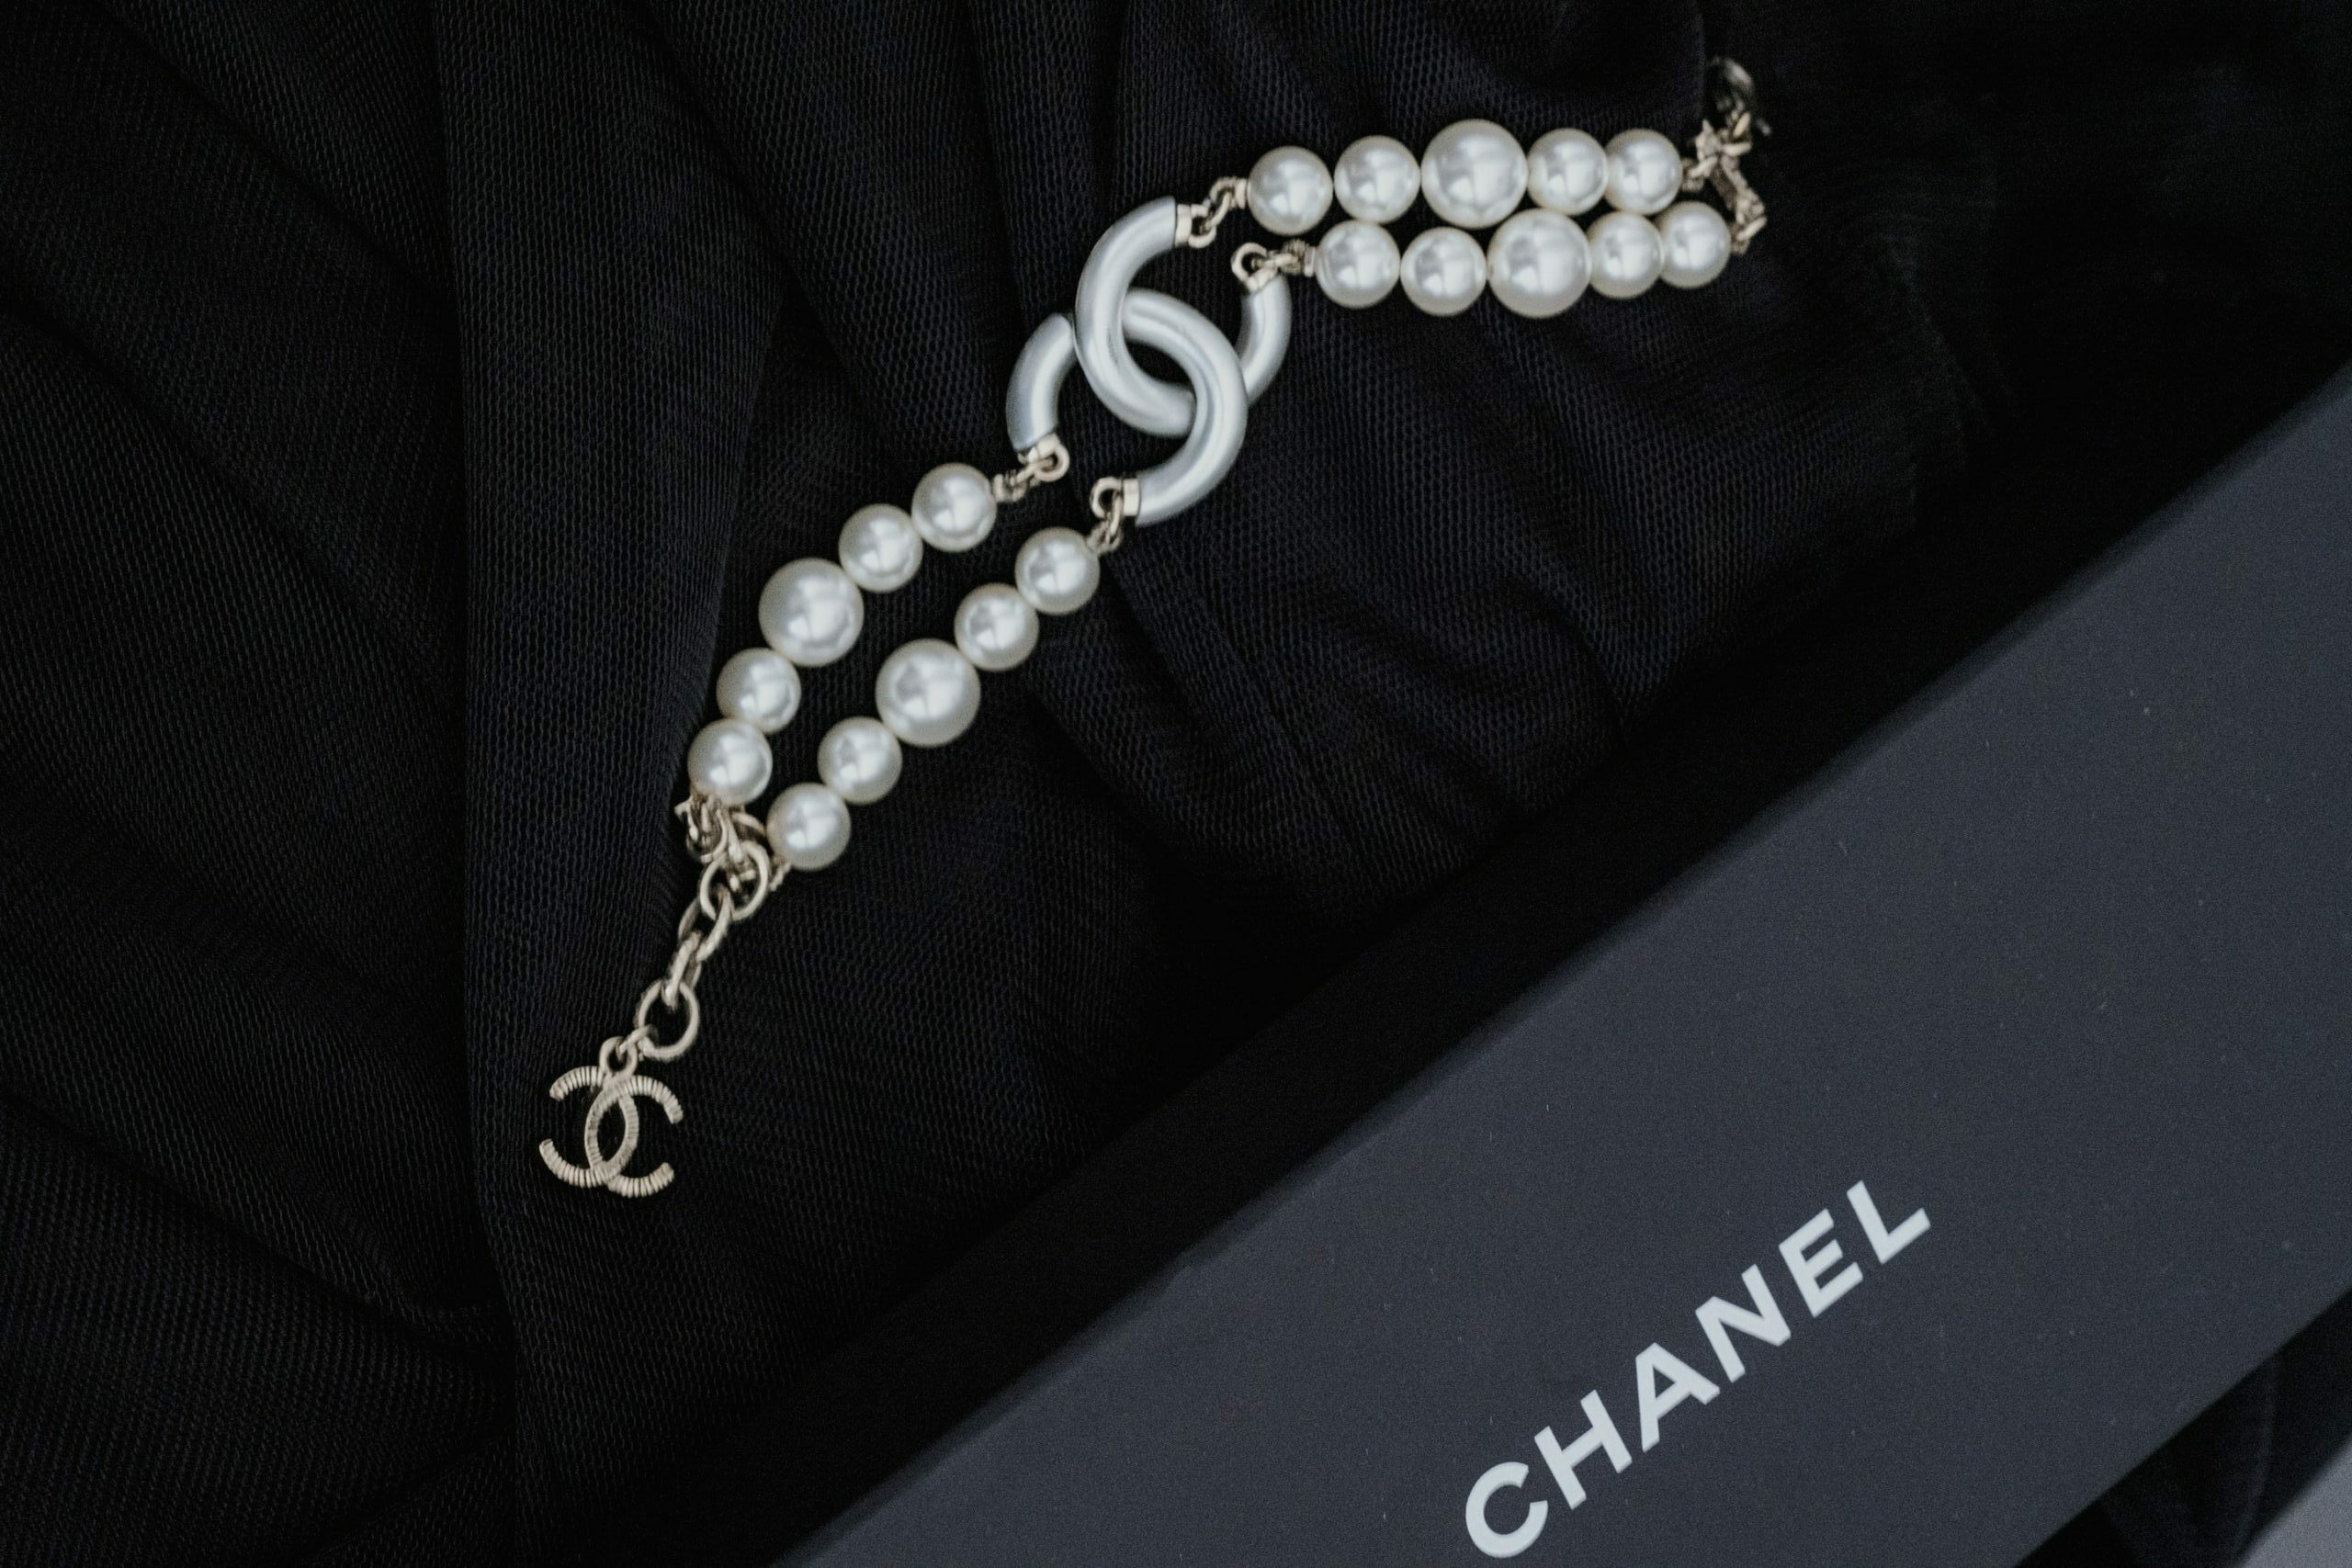 Chanel's Enduring Influence on Pop Culture: From Audrey Hepburn to Beyoncé